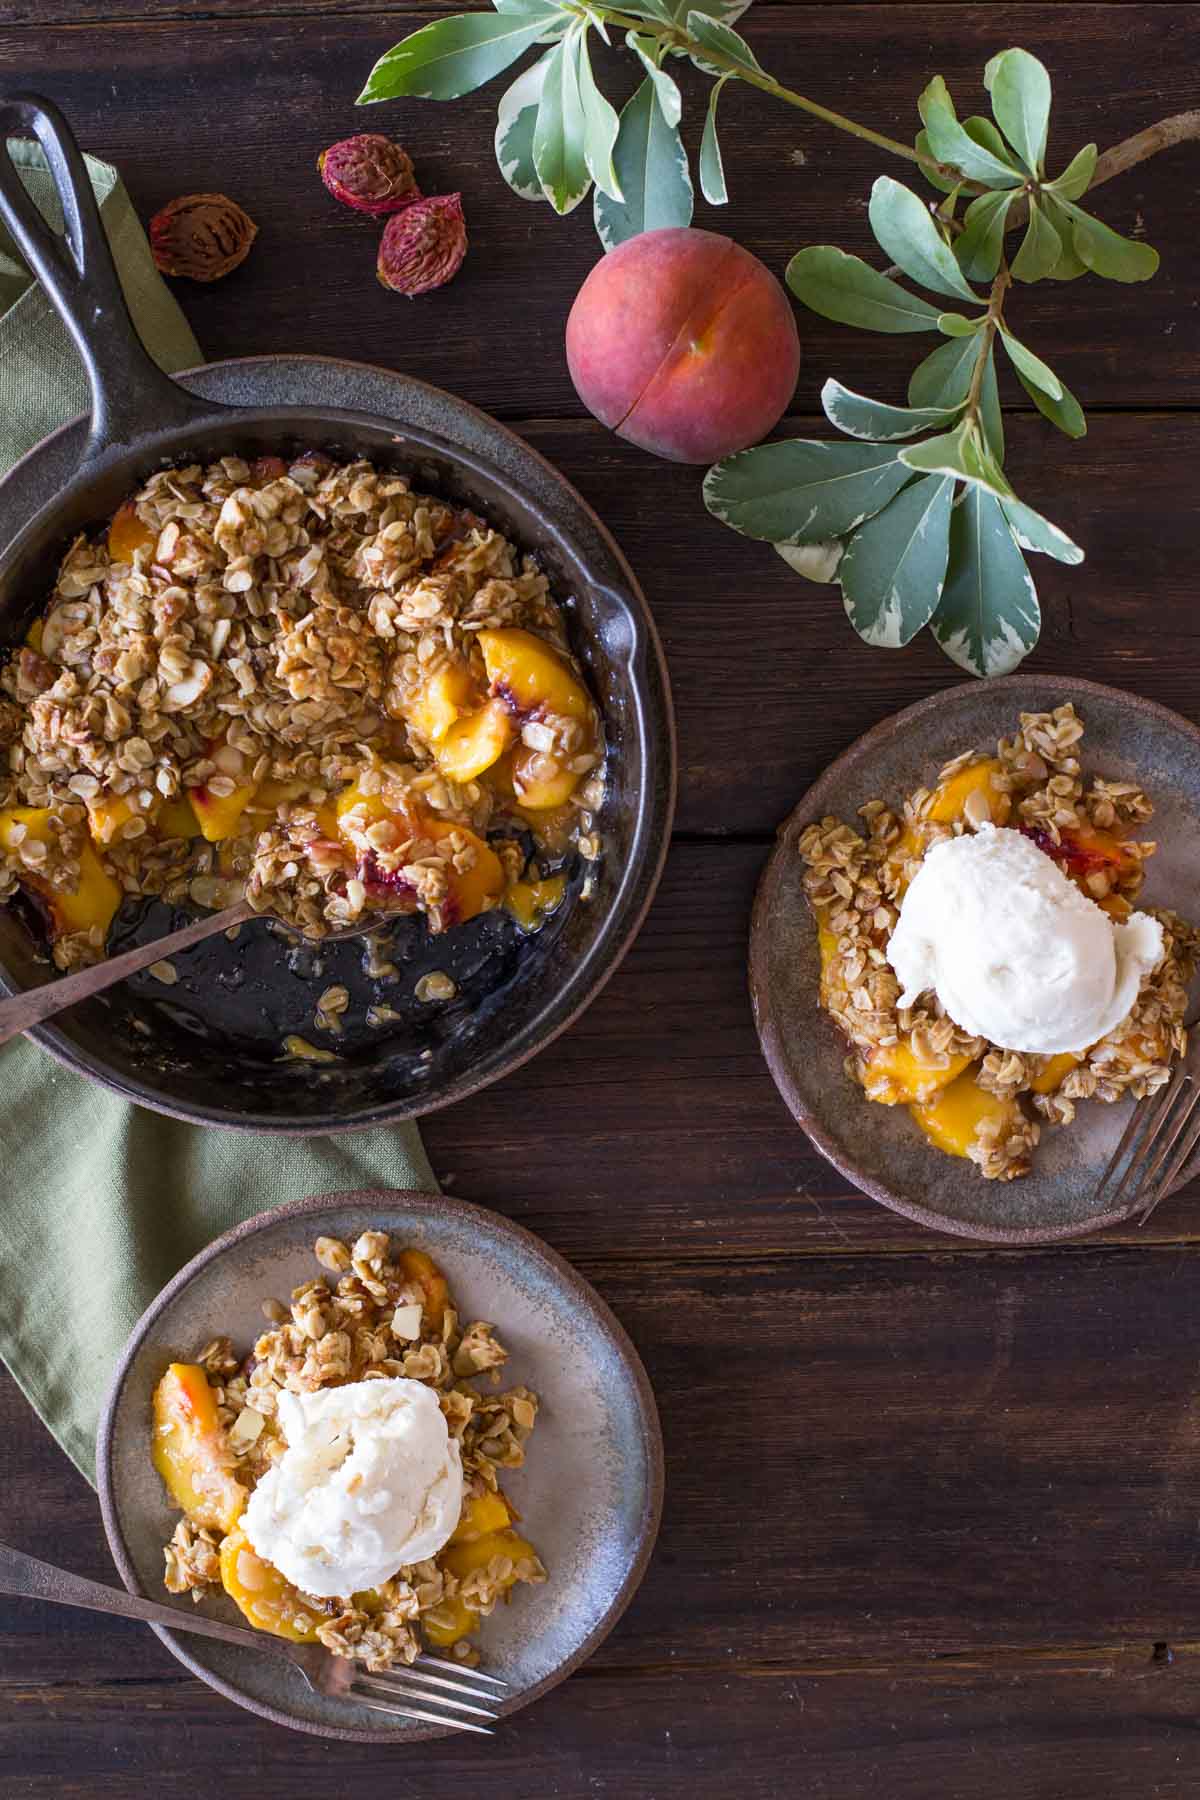 Two plates of Easy Skillet Peach Crisp topped with vanilla ice cream, sitting next to the skillet of Peach Crisp, as well as a whole peach and a few peach pits. 